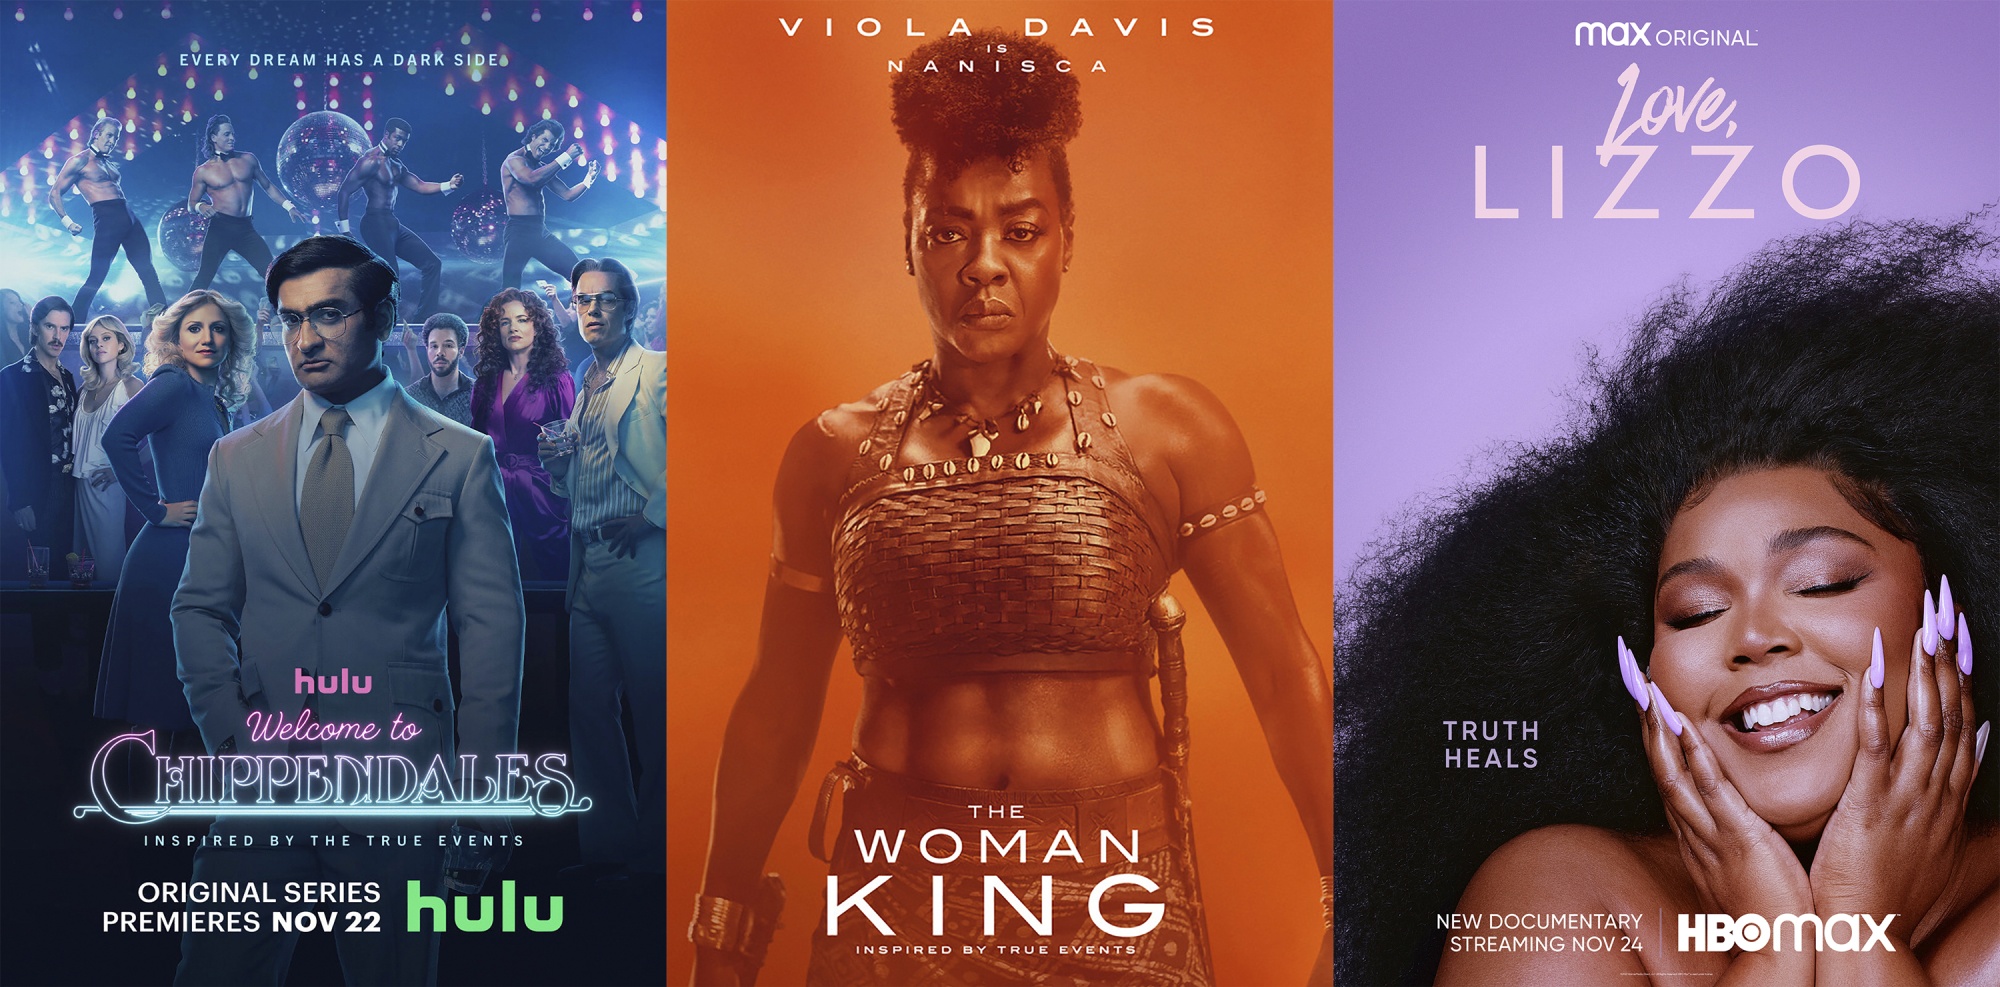 New This Week Lizzo, Criminal Minds And The Woman King